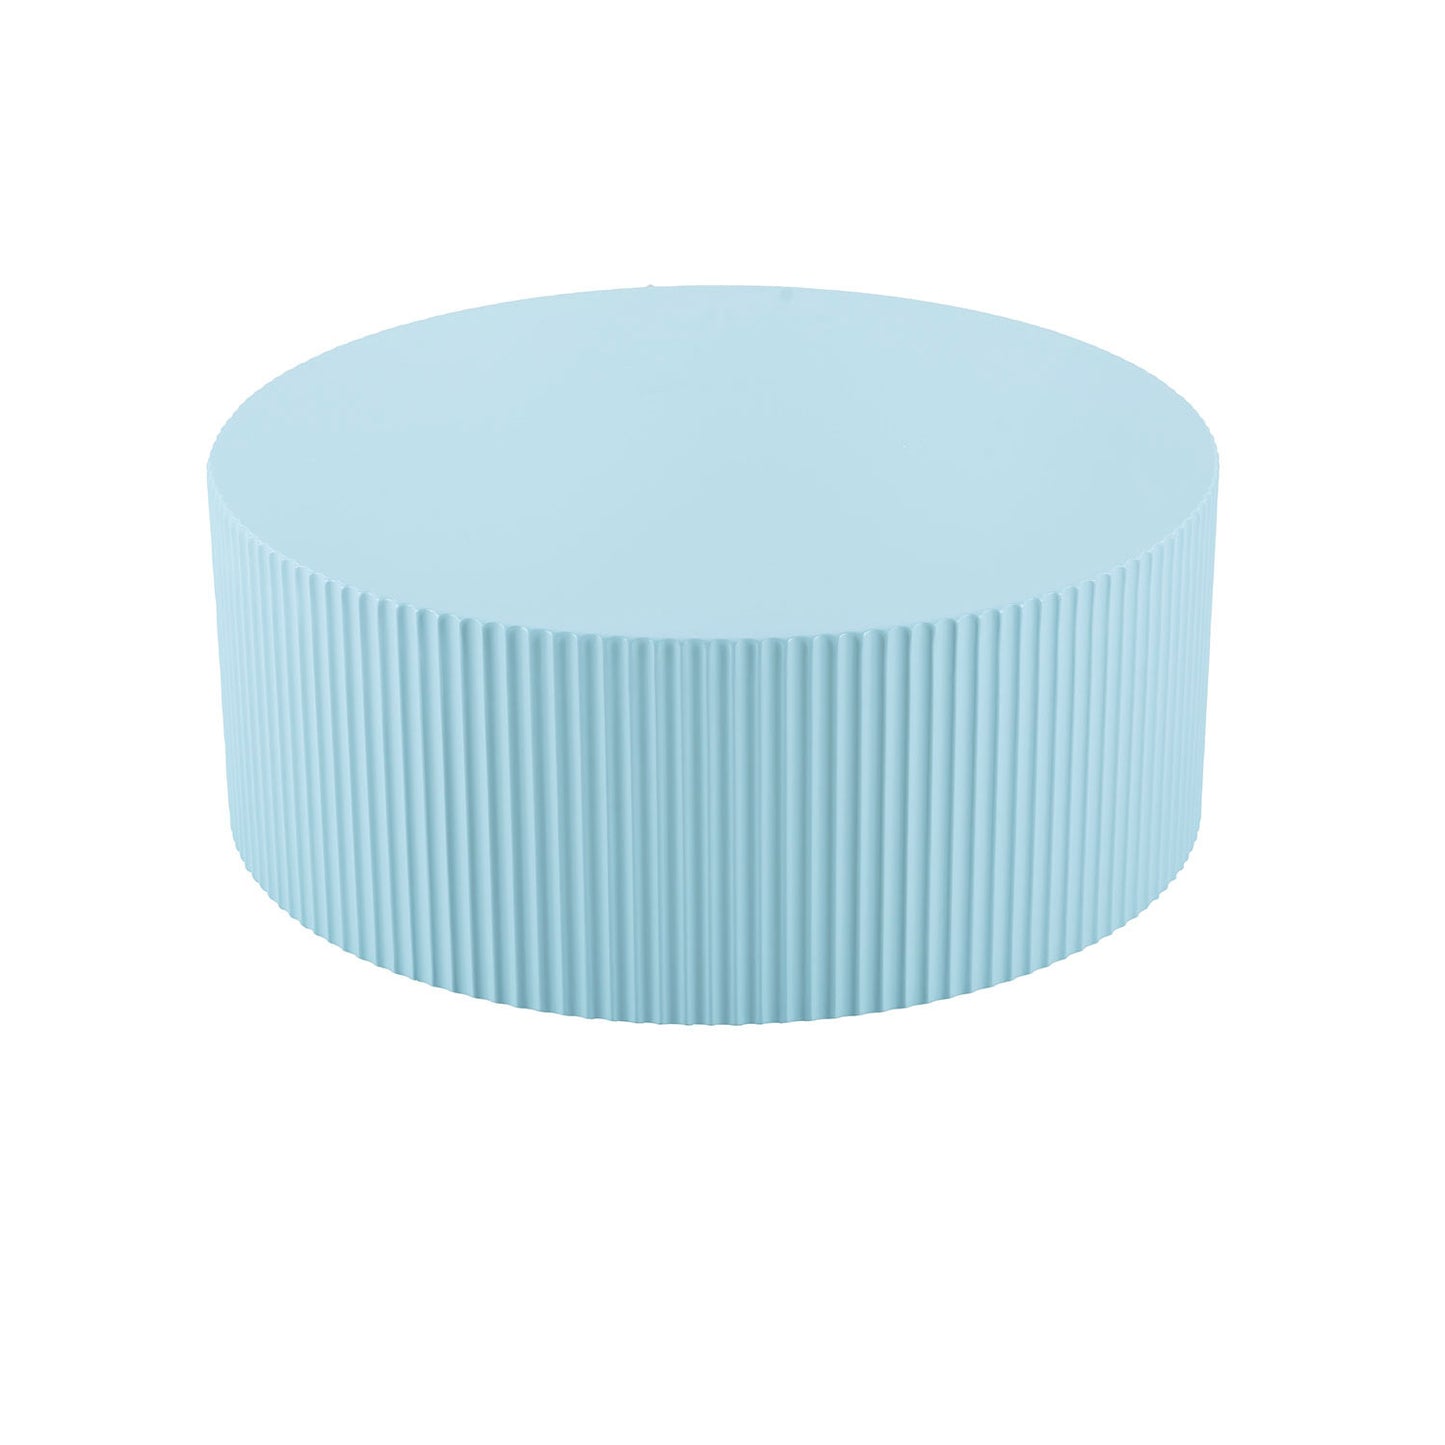 Justone Modern Round Relief Design Coffee Table - Light Blue